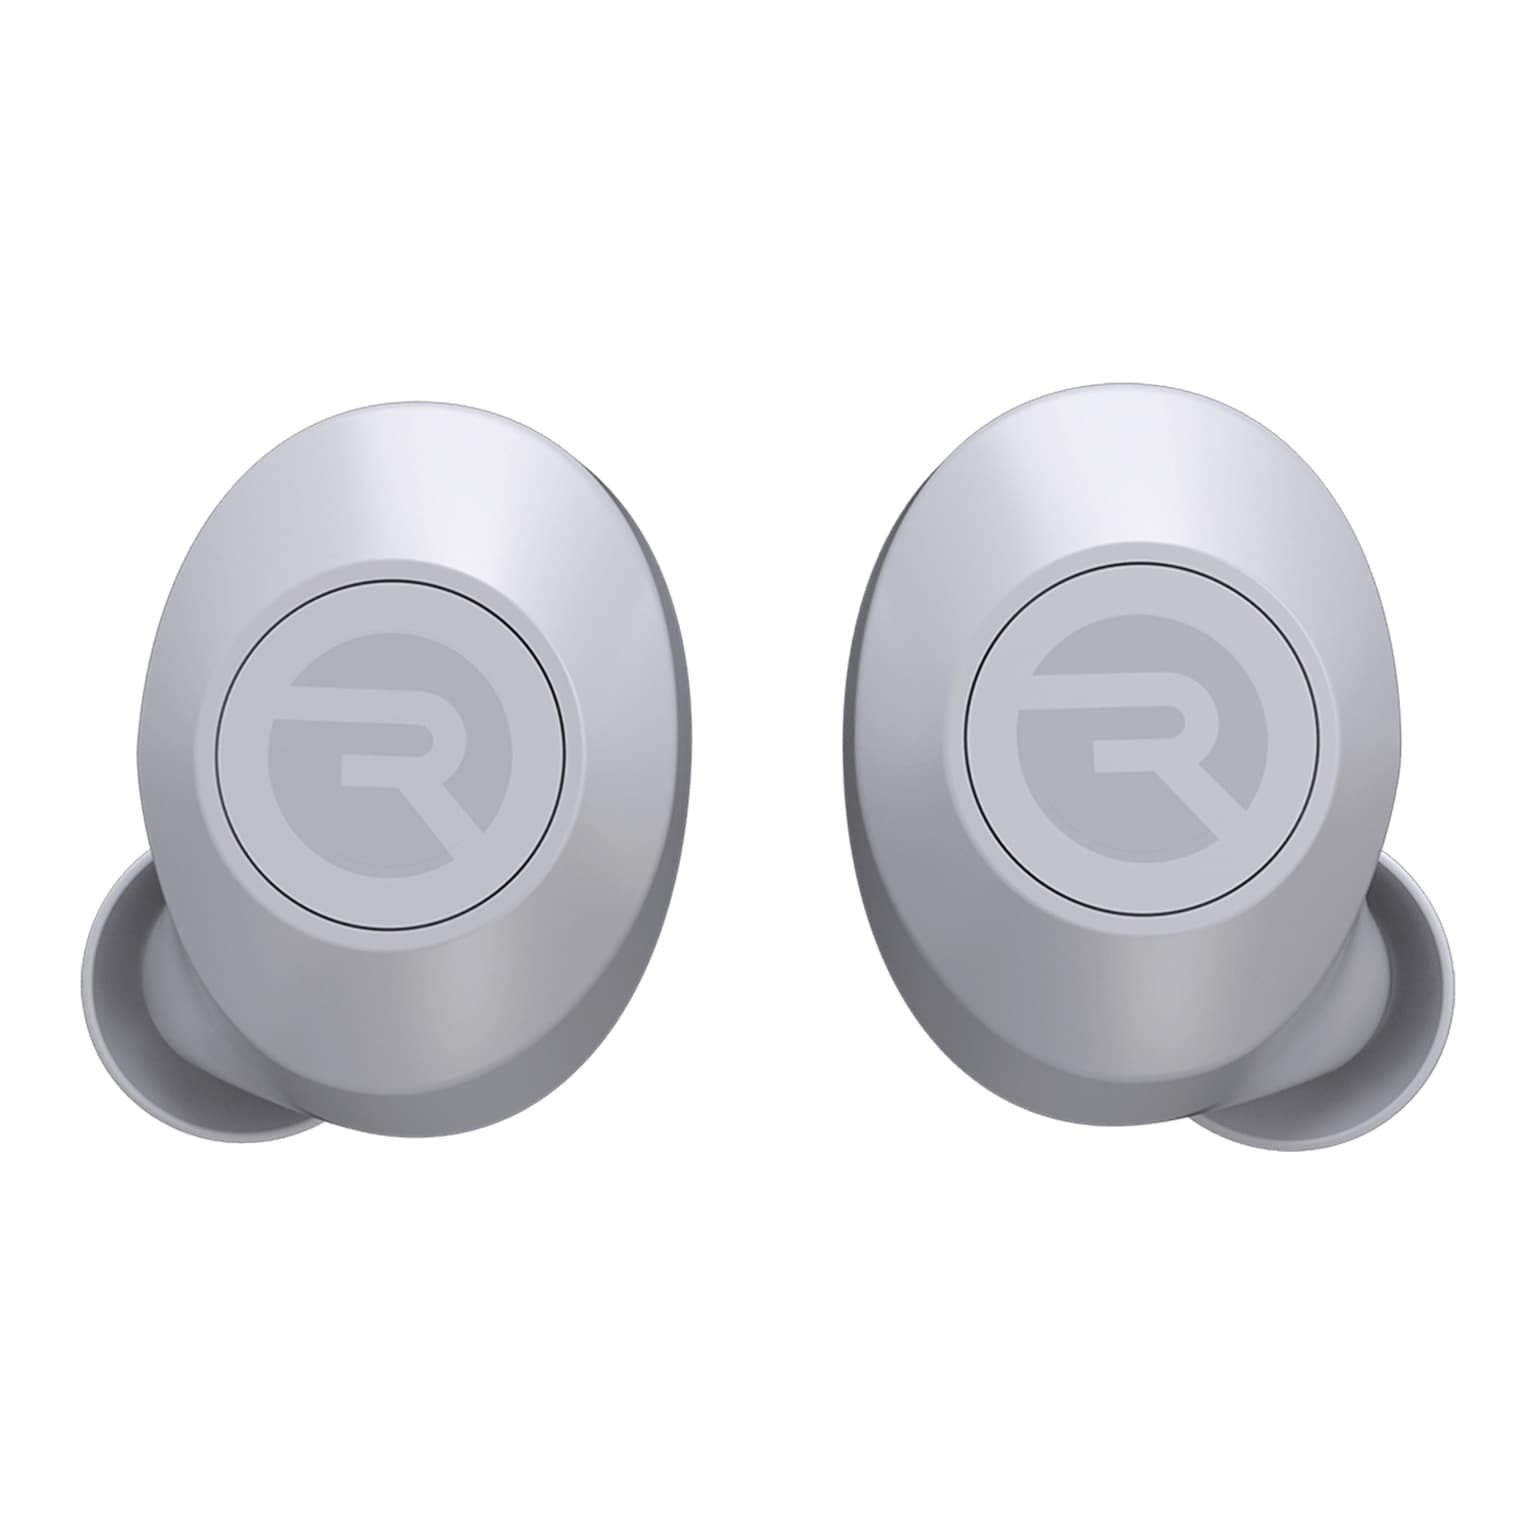 Raycon The Everyday In-Ear True Wireless Stereo BT Earbuds with Microphone and Charging Case, Frost White (RBE725-21E-WHI)